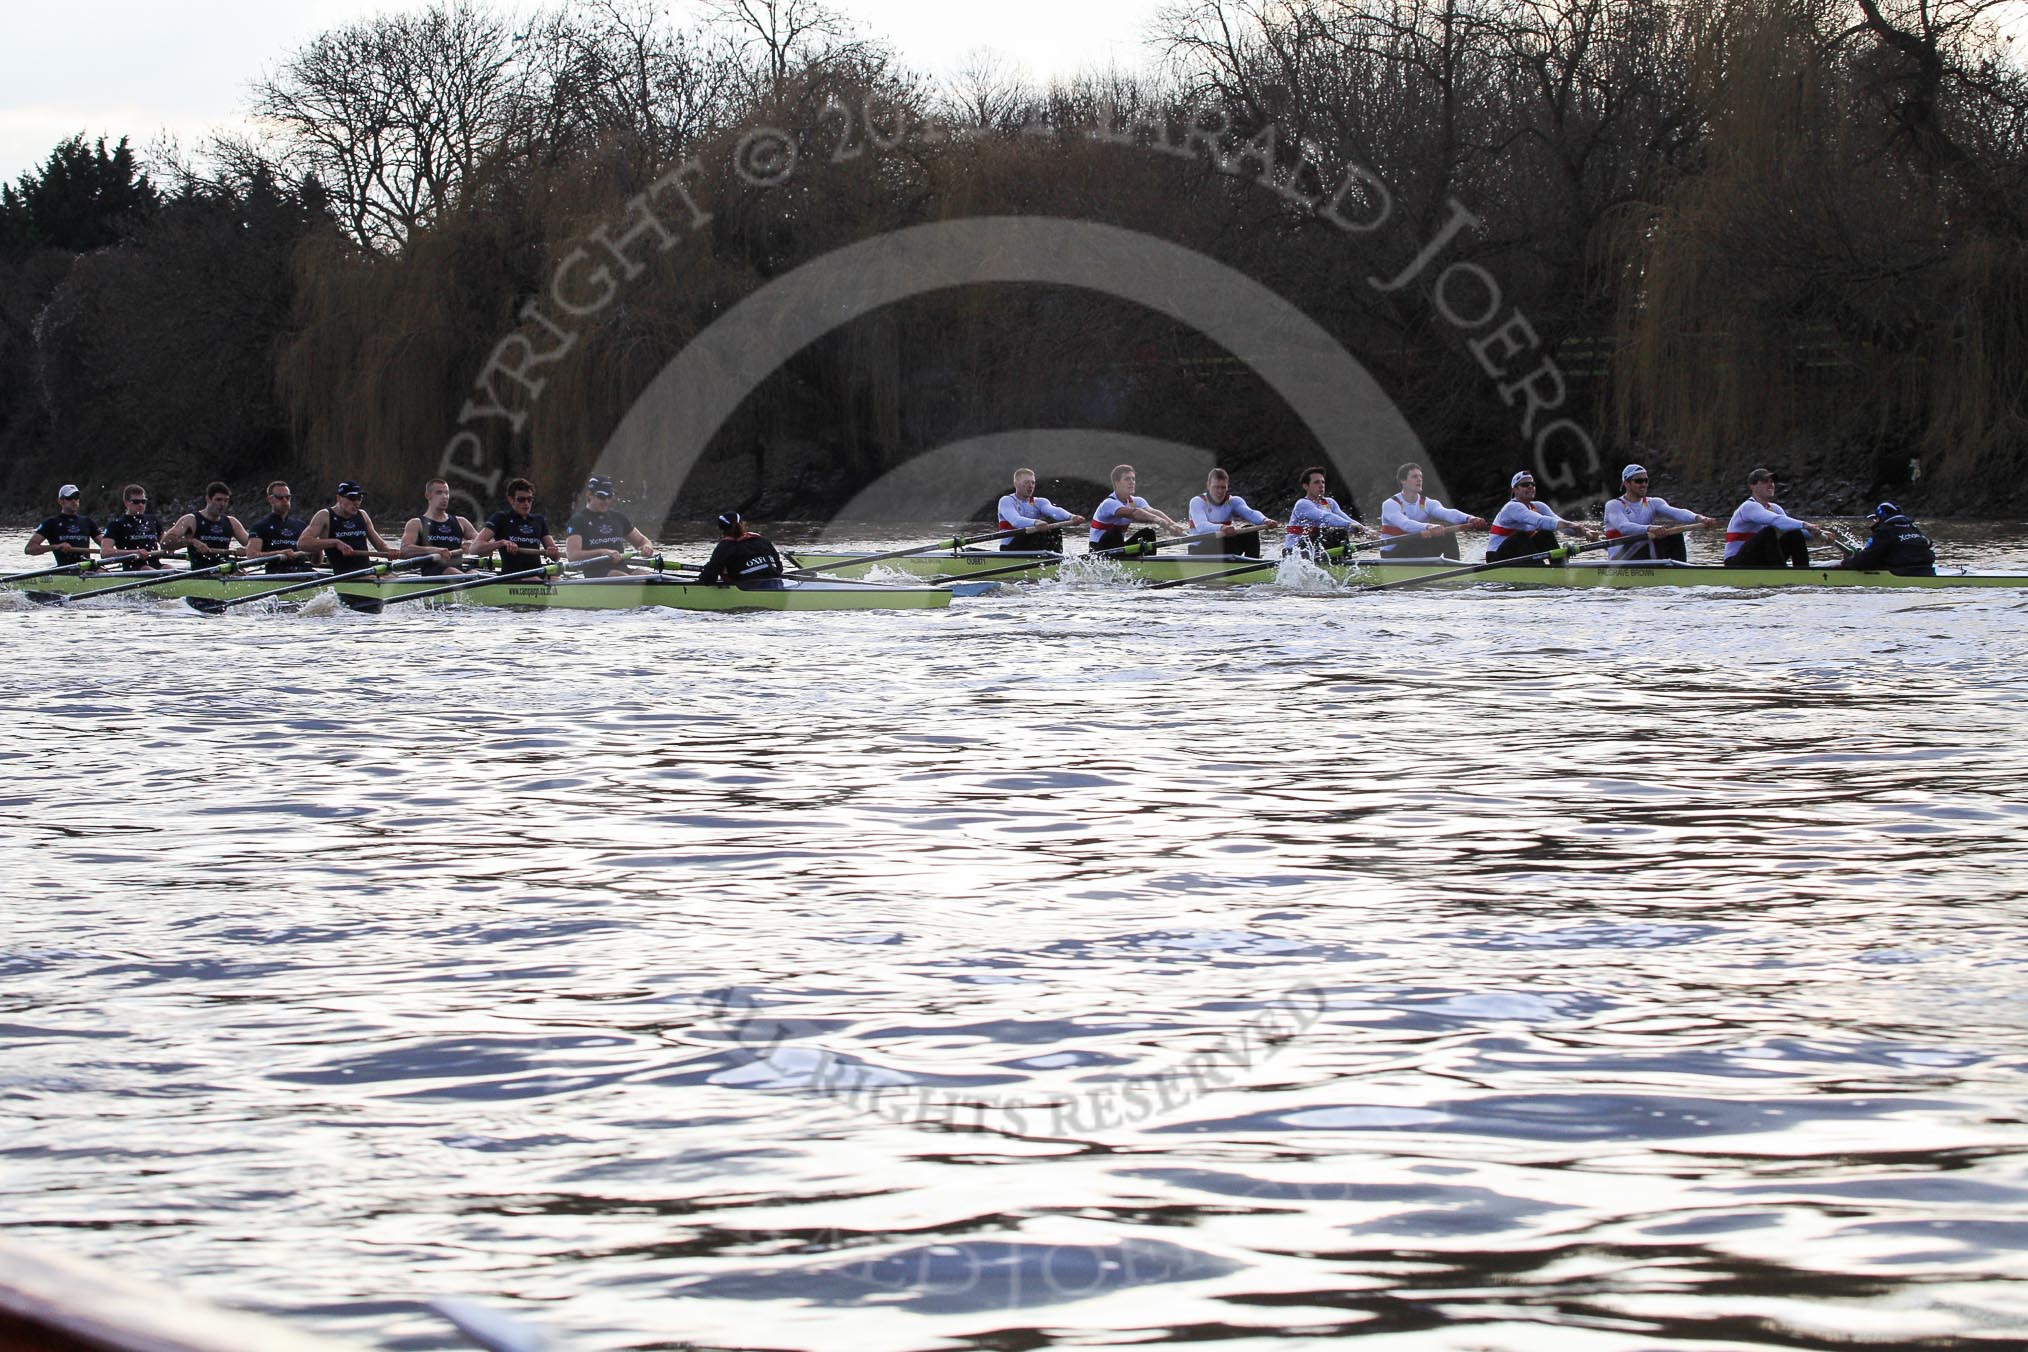 The Boat Race season 2012 - fixture OUBC vs German U23: Close to the finish of the second race - the Oxford Blue Boat in the lead against the German U23 boat..
River Thames between Putney and Mortlake,
London,

United Kingdom,
on 26 February 2012 at 15:50, image #98